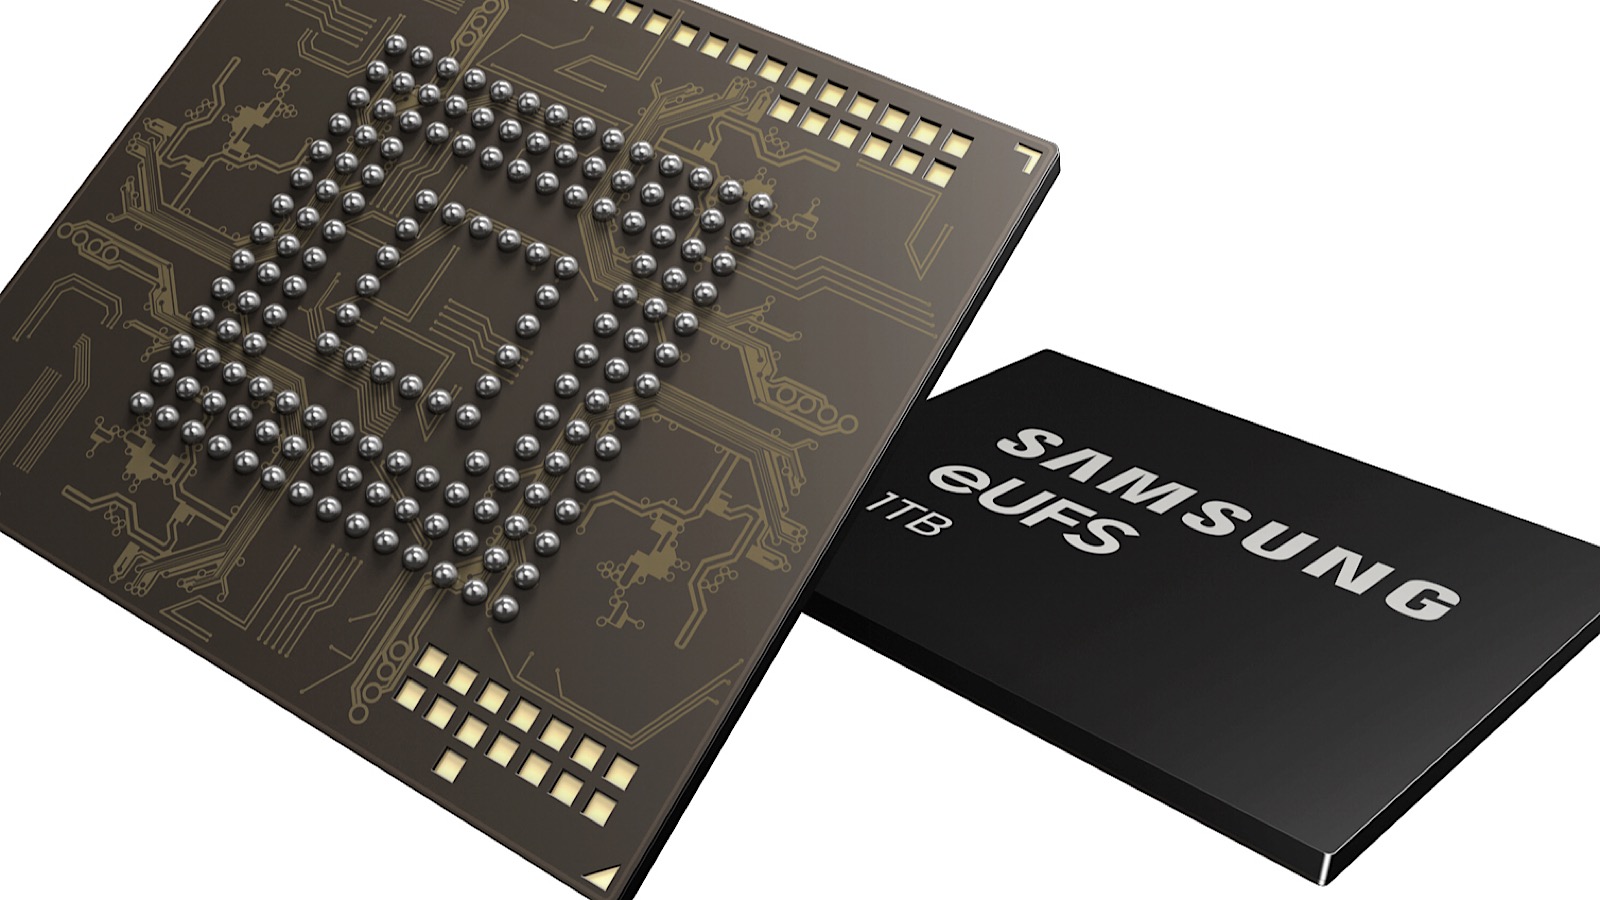 Samsung's 1TB eUFS chip for phones and tablets